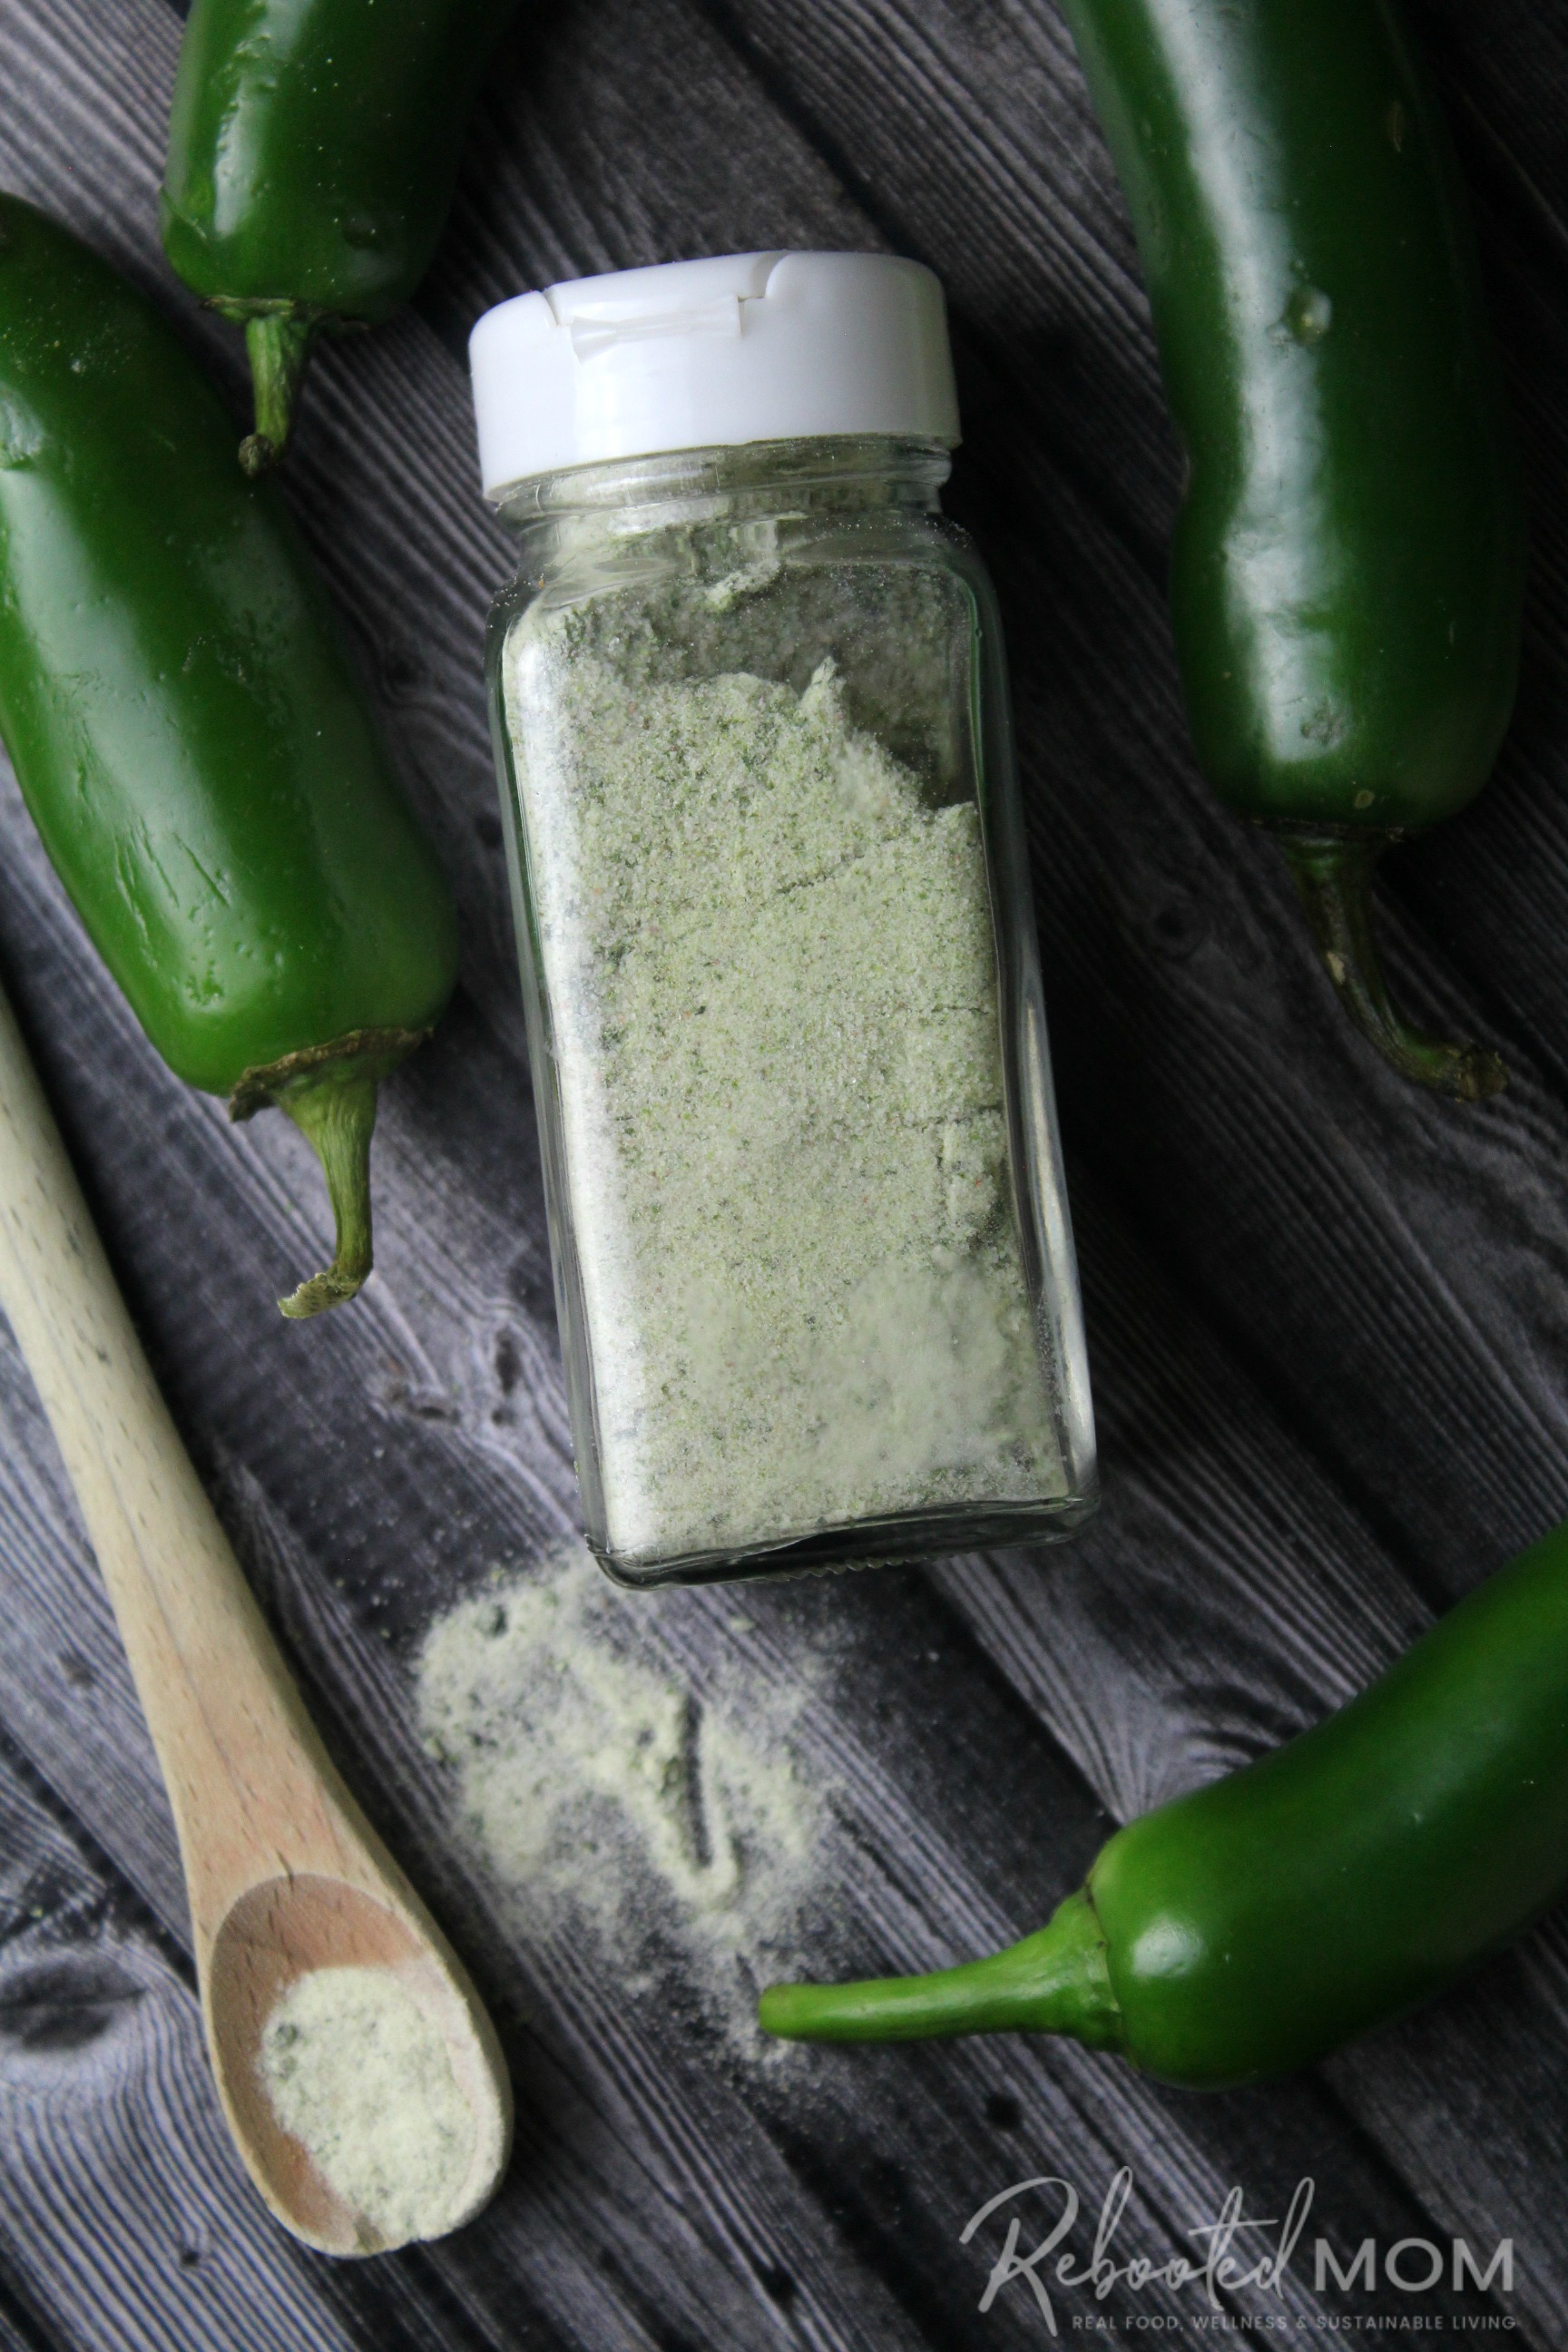 This homemade jalapeño salt recipe is easy to make at home and delicious on everything from baked potatoes, to steak and even popcorn!